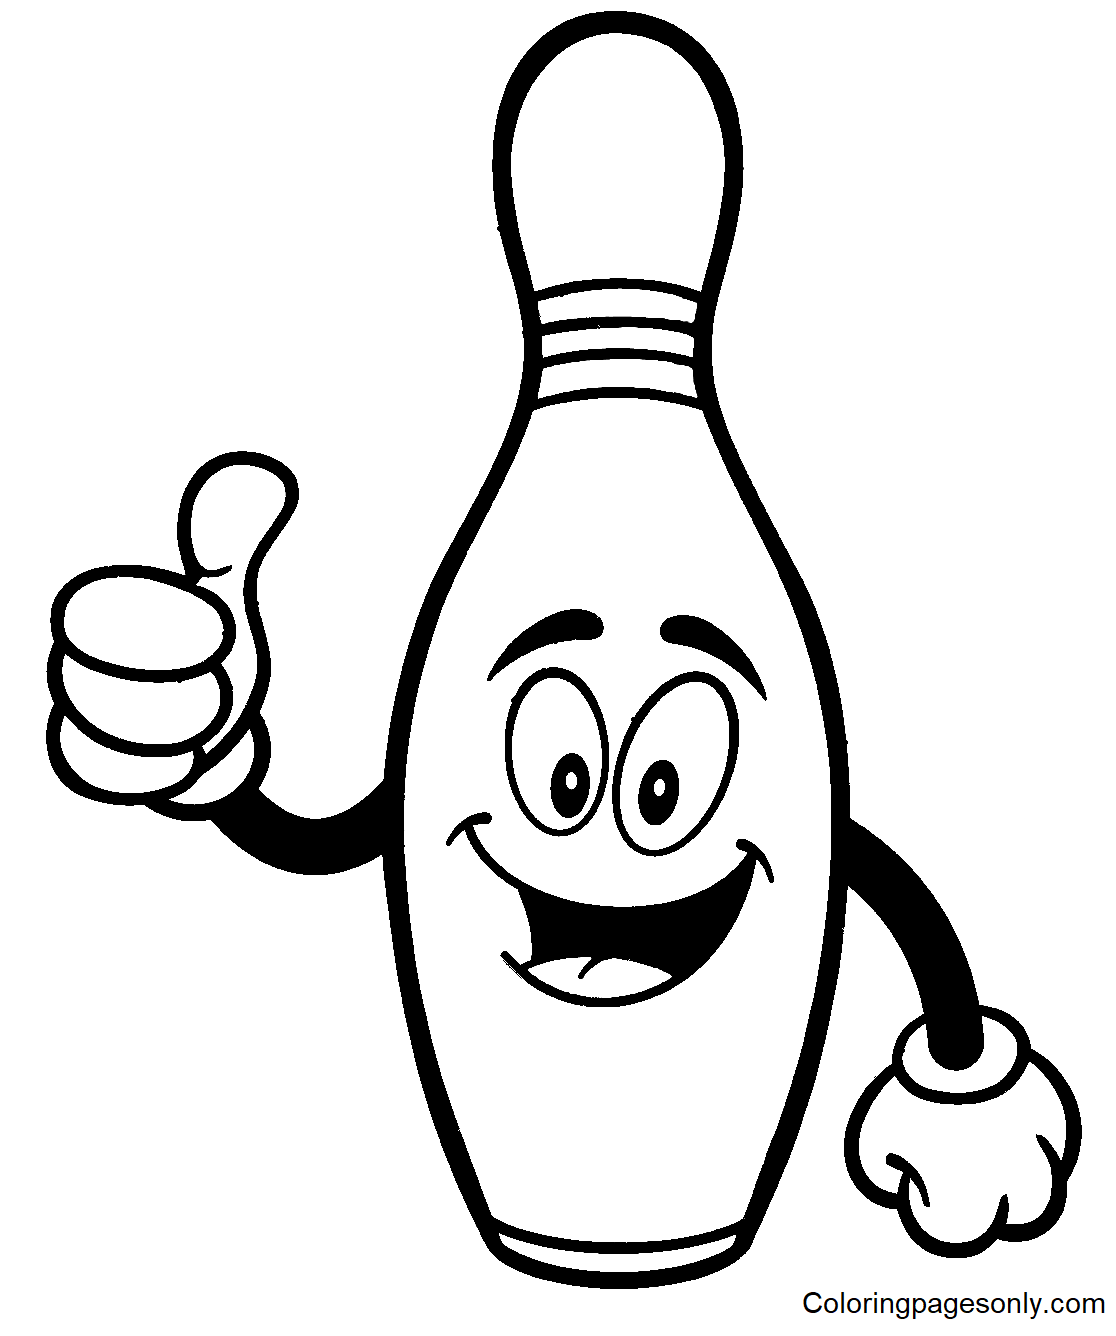 Bowling Pin with Thumbs Up Coloring Pages